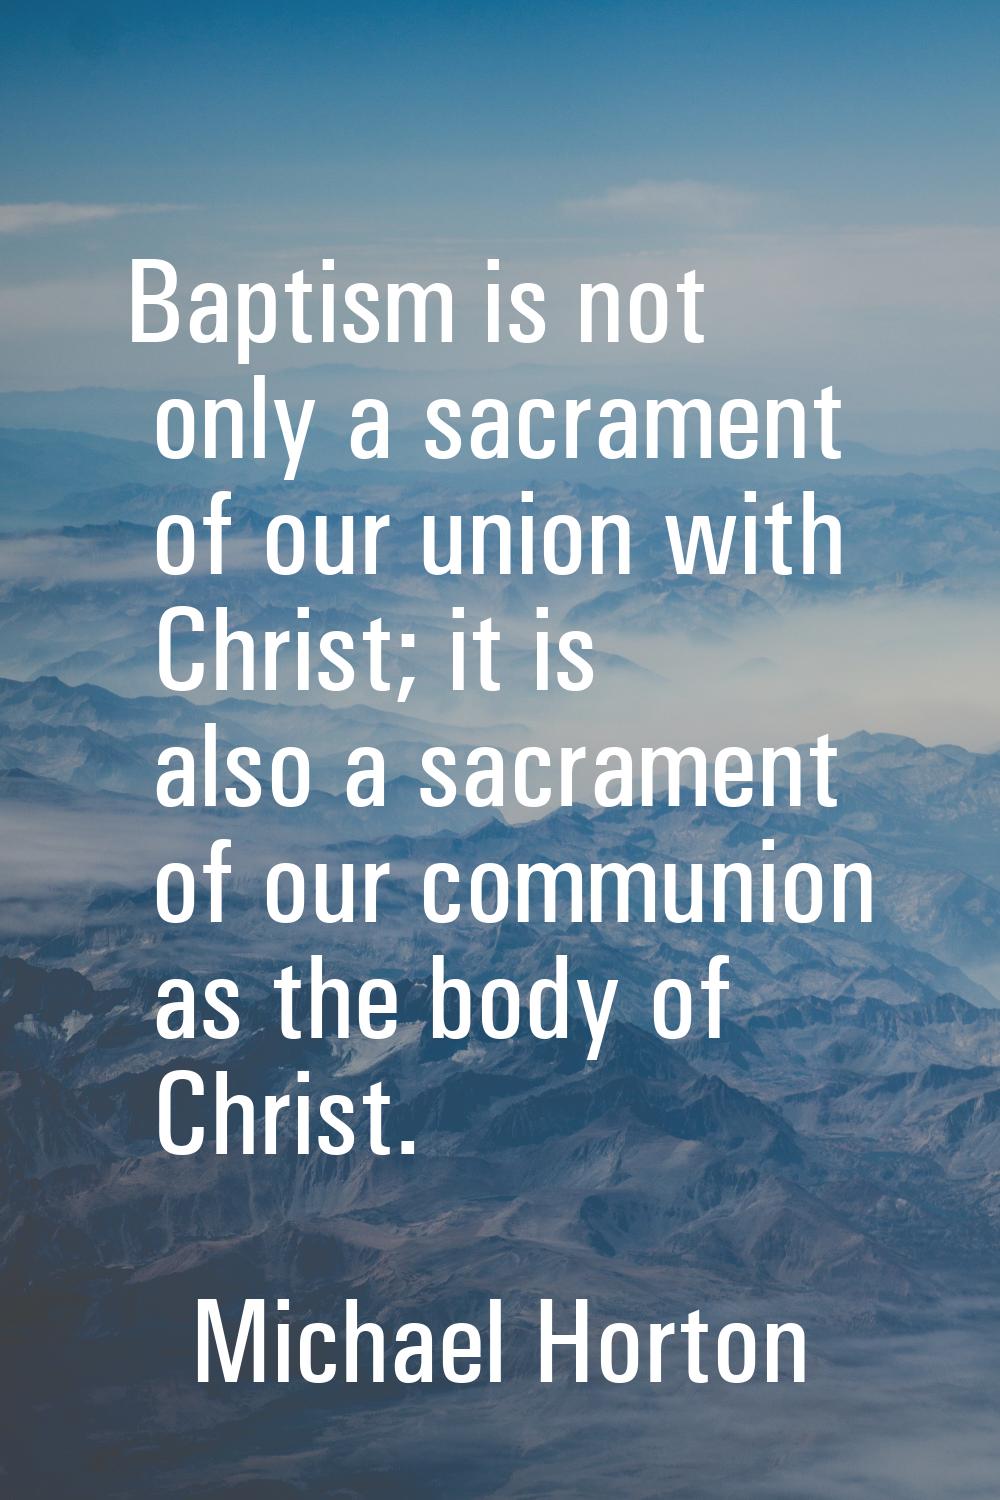 Baptism is not only a sacrament of our union with Christ; it is also a sacrament of our communion a